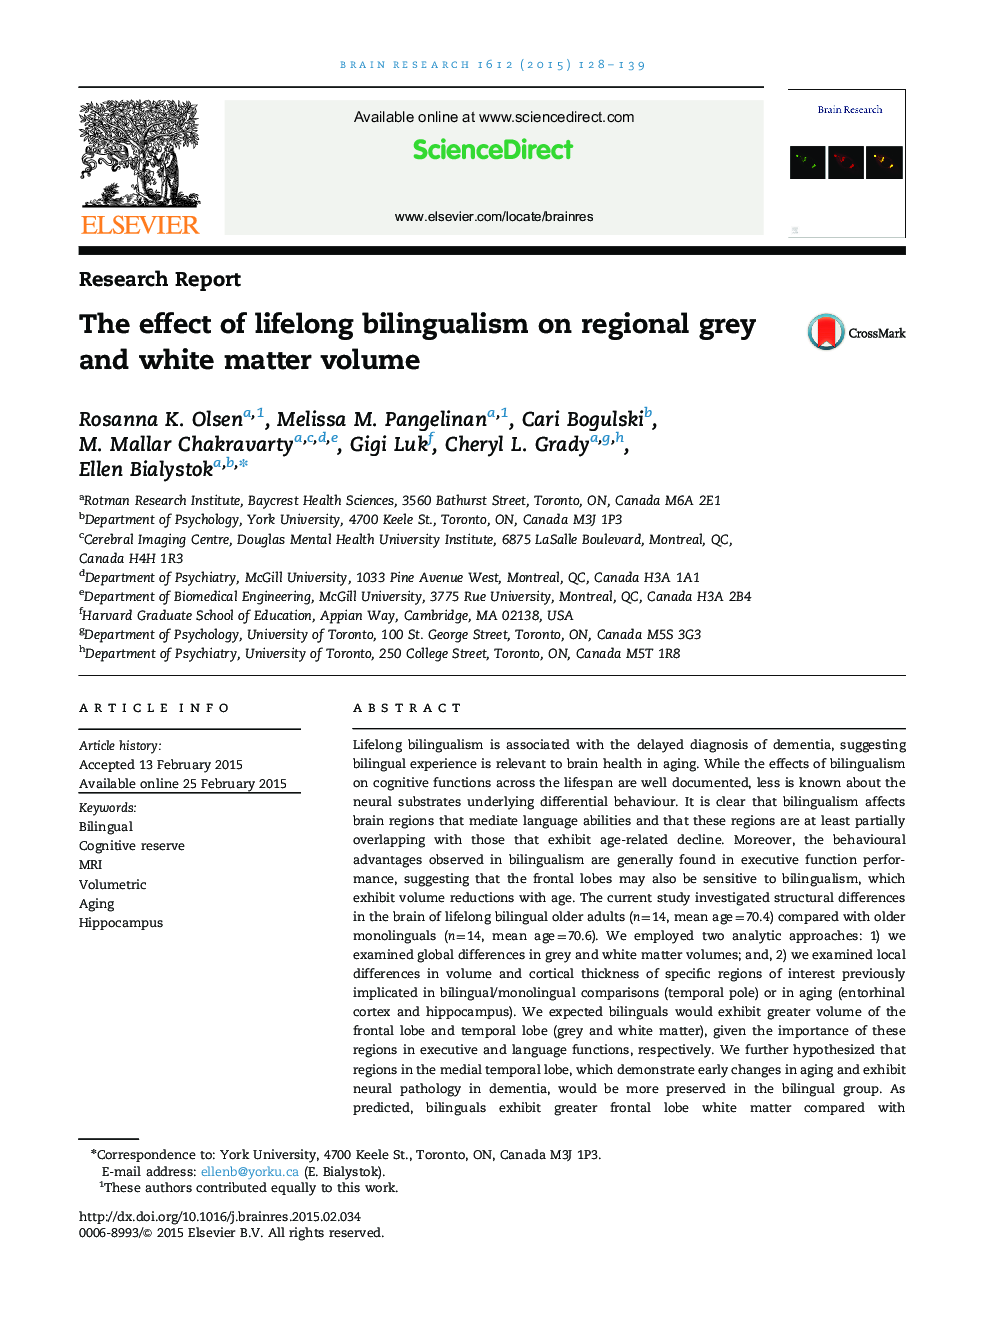 Research ReportThe effect of lifelong bilingualism on regional grey and white matter volume